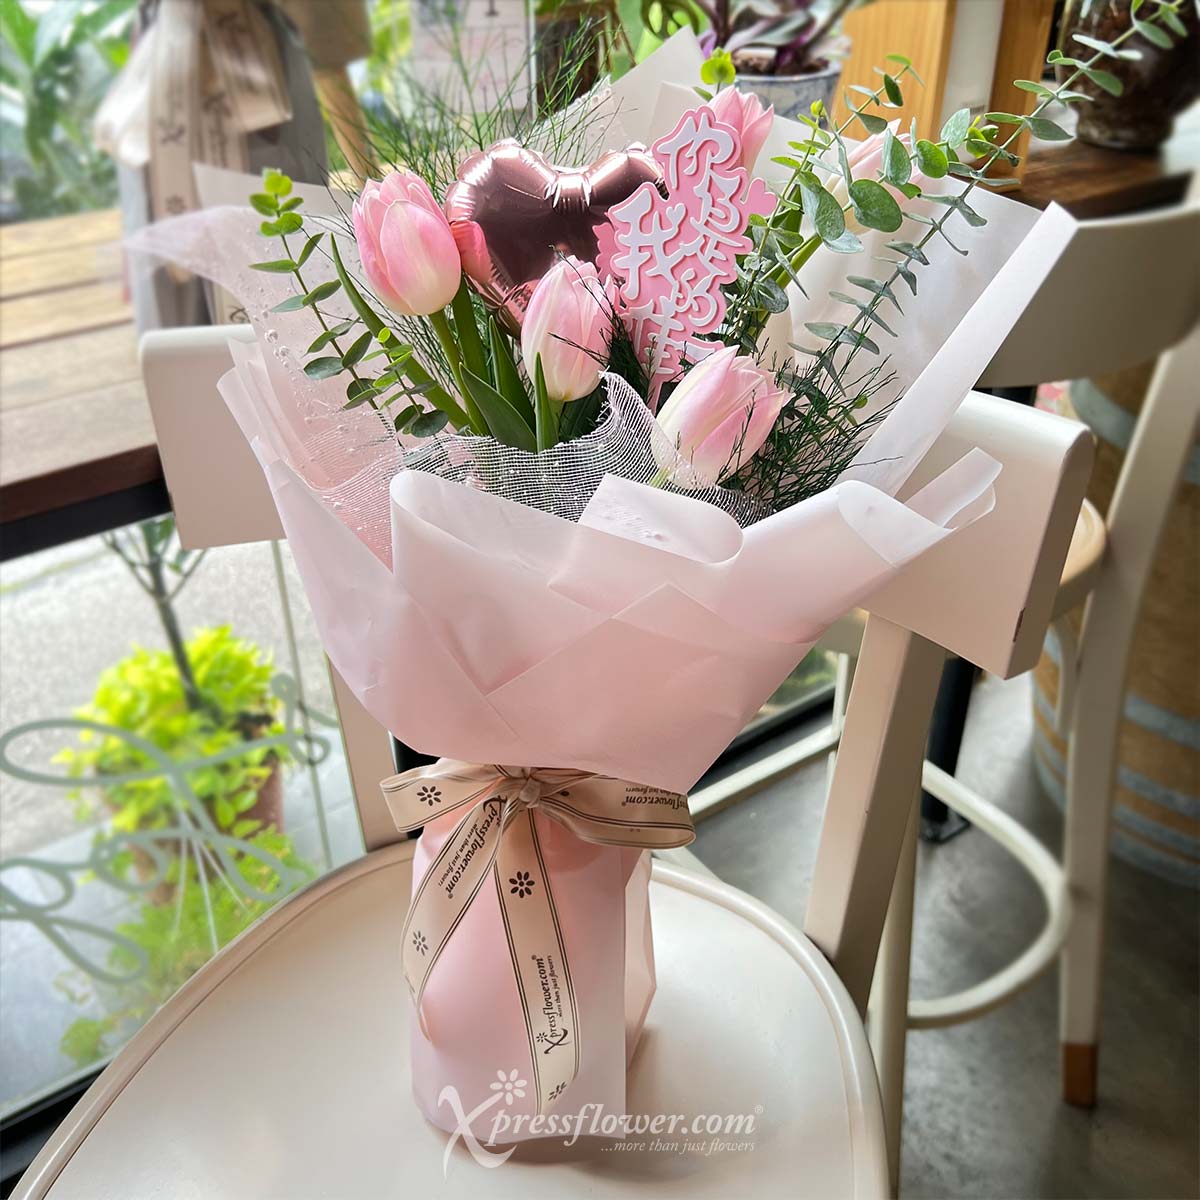  Purely Love (5 Pink Tulips with "你是我的唯一" decor)